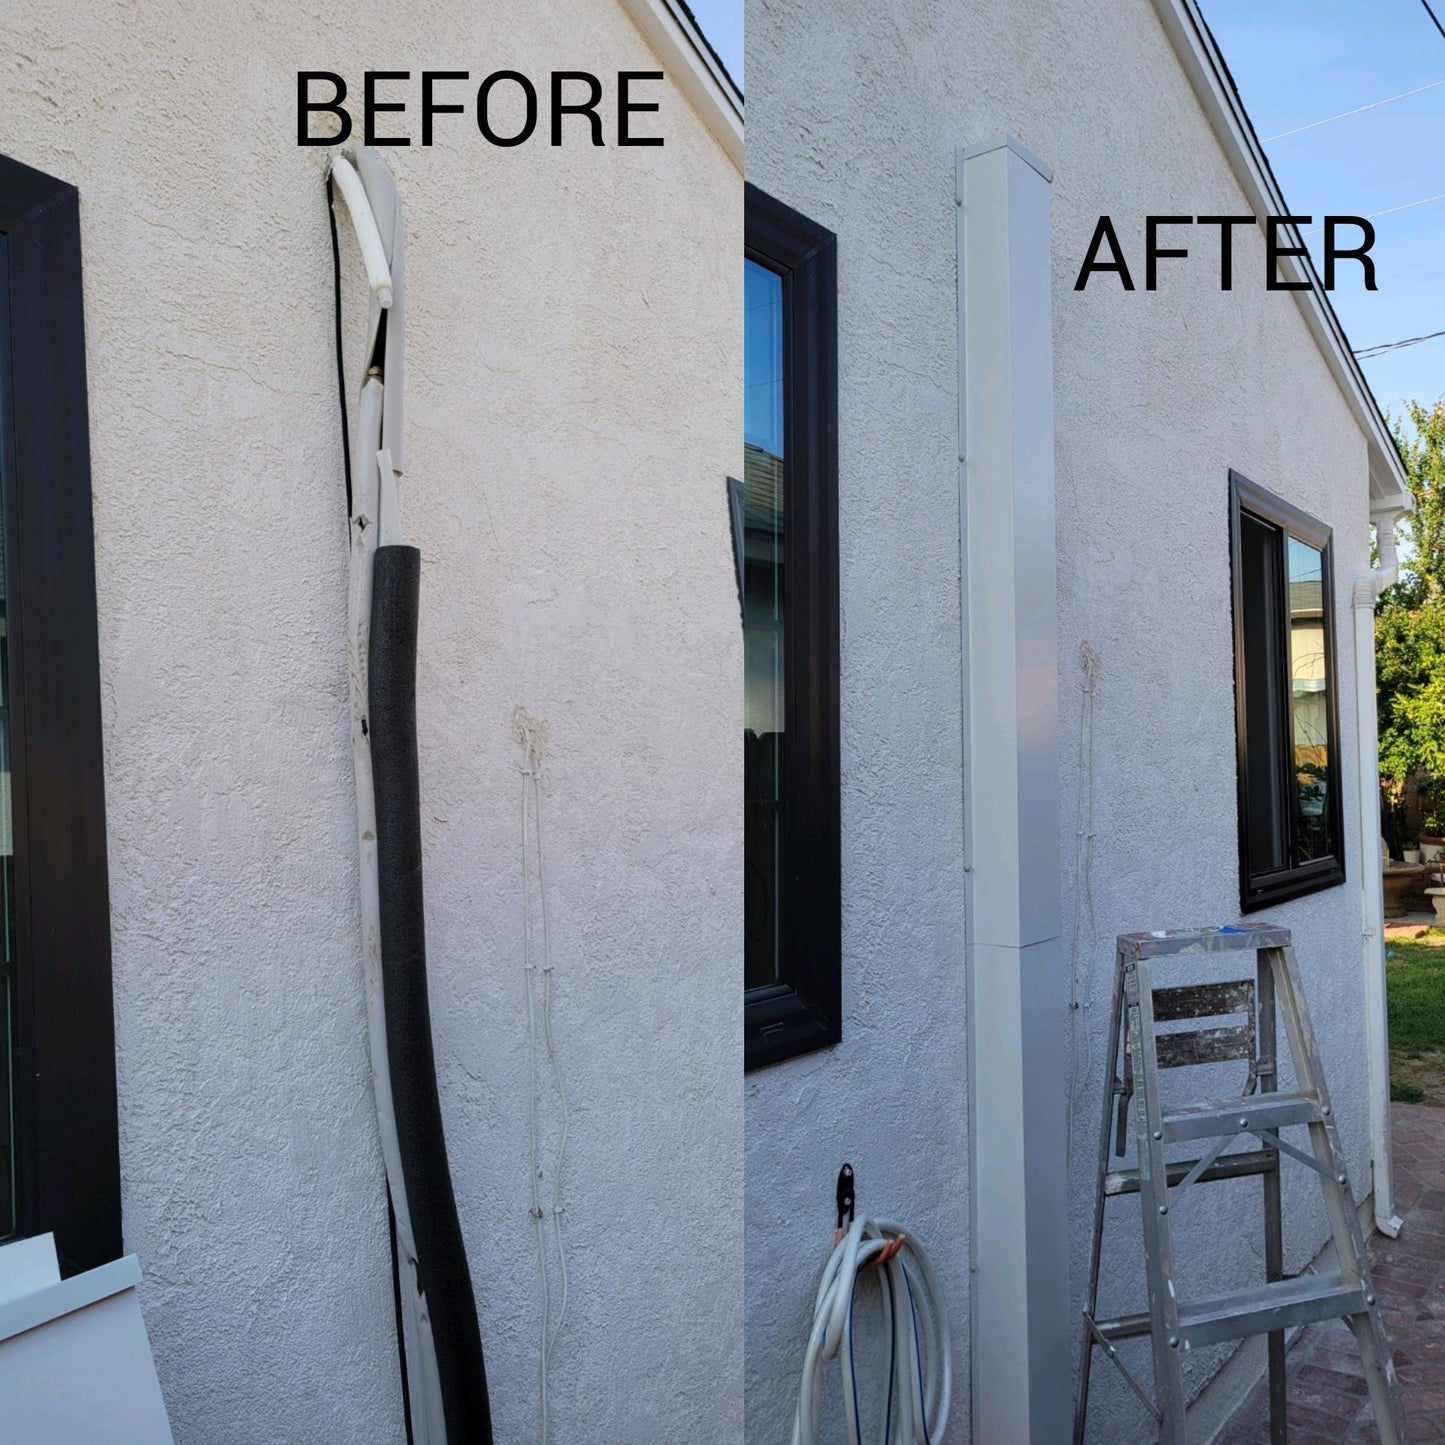 Side-by-side images showcase the exterior of a house. The left image, labeled "BEFORE," displays exposed cables and mounting hardware. The right image, labeled "AFTER," highlights the cables neatly enclosed in a Perma Cover Residential Series - Copper Metal HVAC Line Set Covers - Pure Copper next to a window, with a ladder nearby.